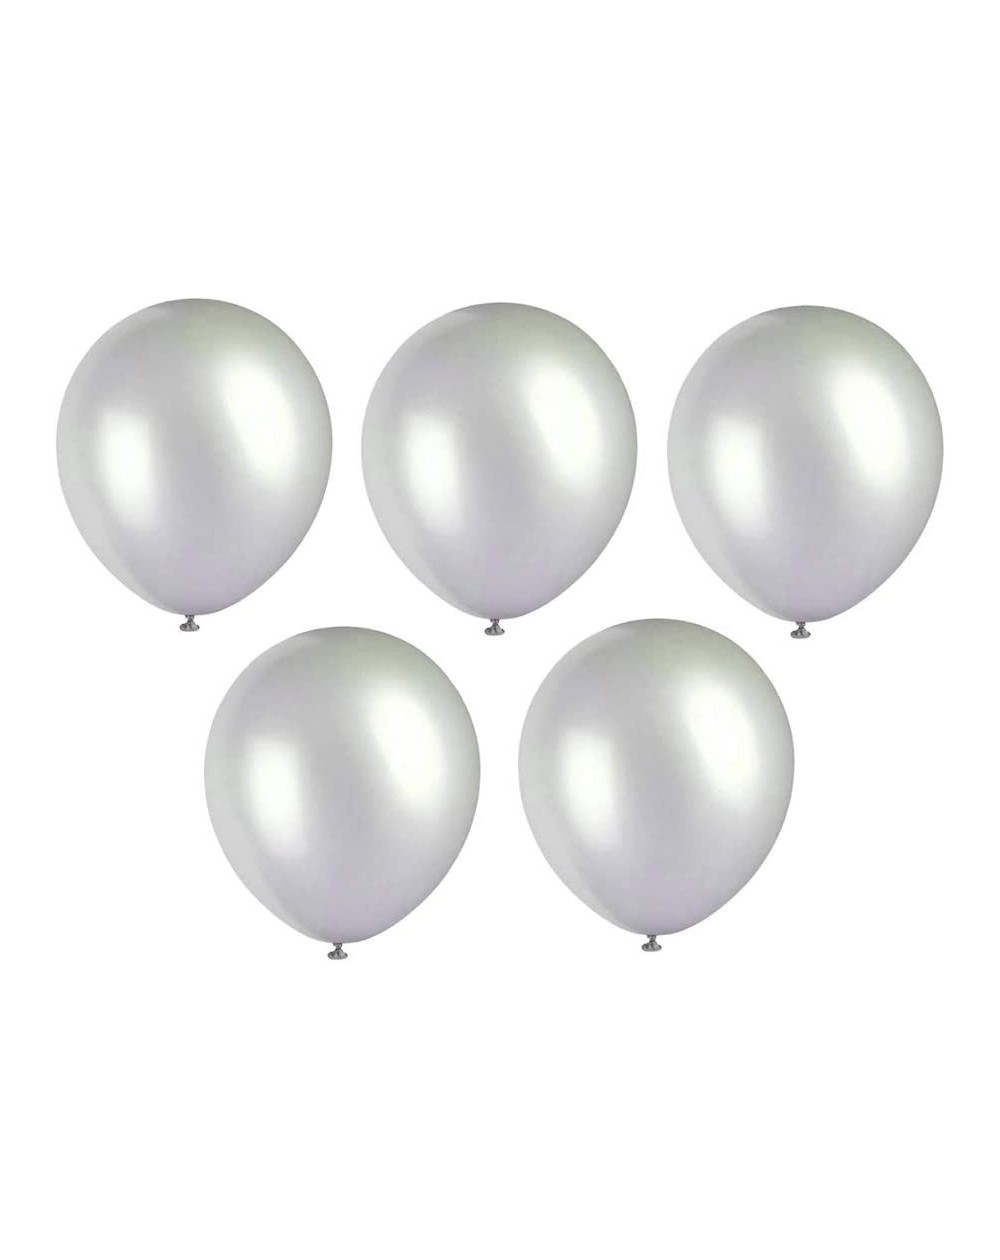 Balloons 5 inch Silver Balloons Quality Latex Balloons Helium Balloons Party Decorations Supplies Pack of 120 - Silver - CN19...